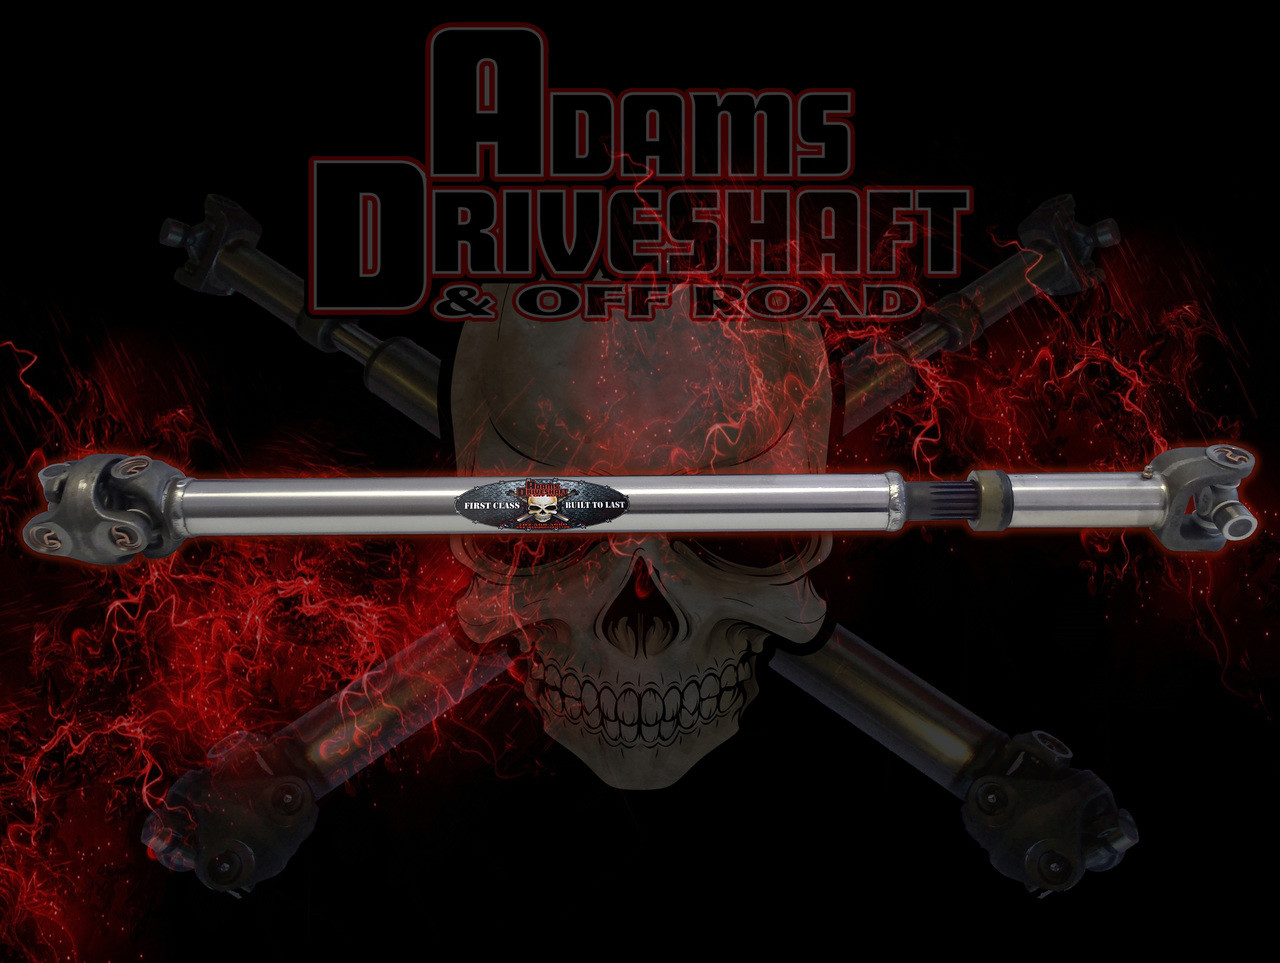 Jeep TJ RUBICON FRONT 1330 CV DRIVESHAFT [EXTREME DUTY SERIES] - Adams  Driveshaft and Off Road